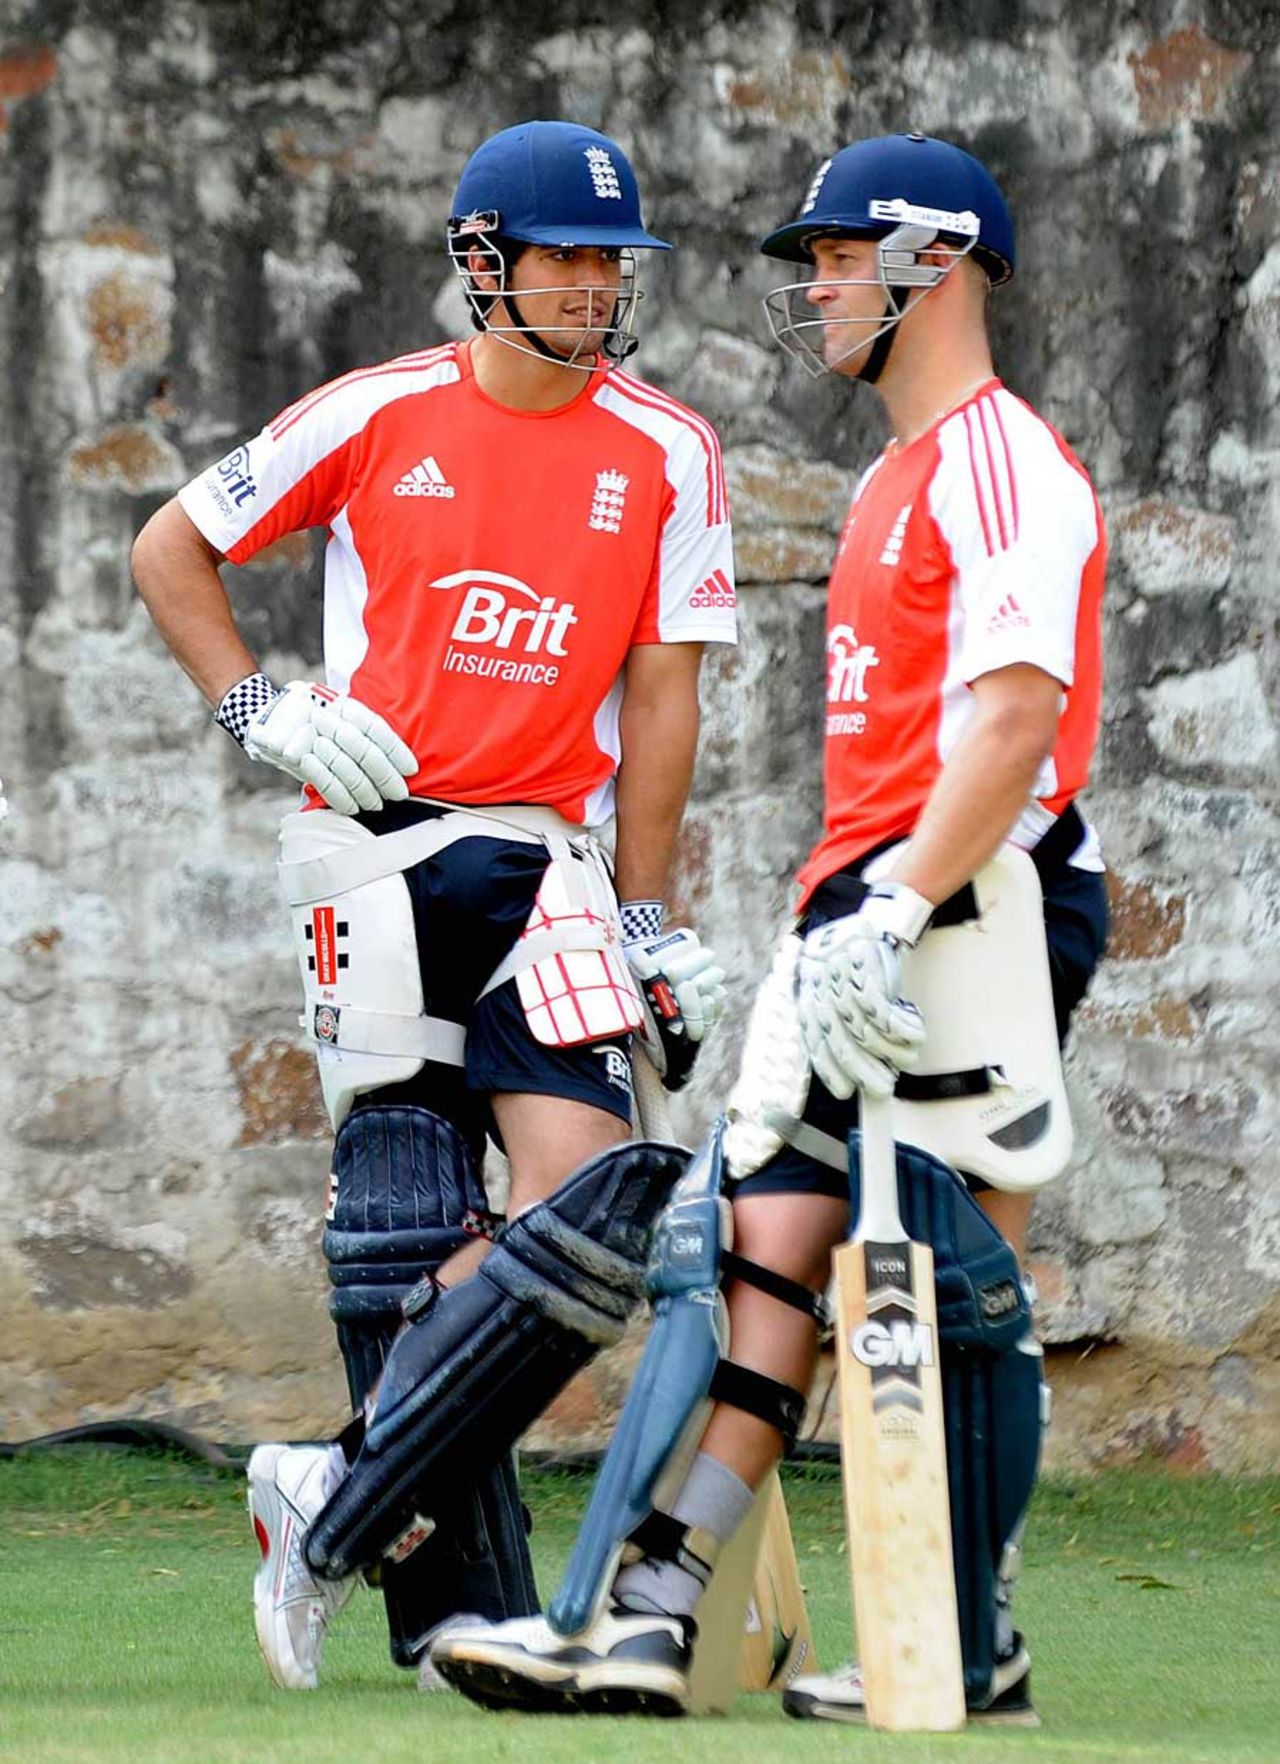 The balance of England's top order continues to cause issues for Alastair Cook, Delhi, October 16, 2011